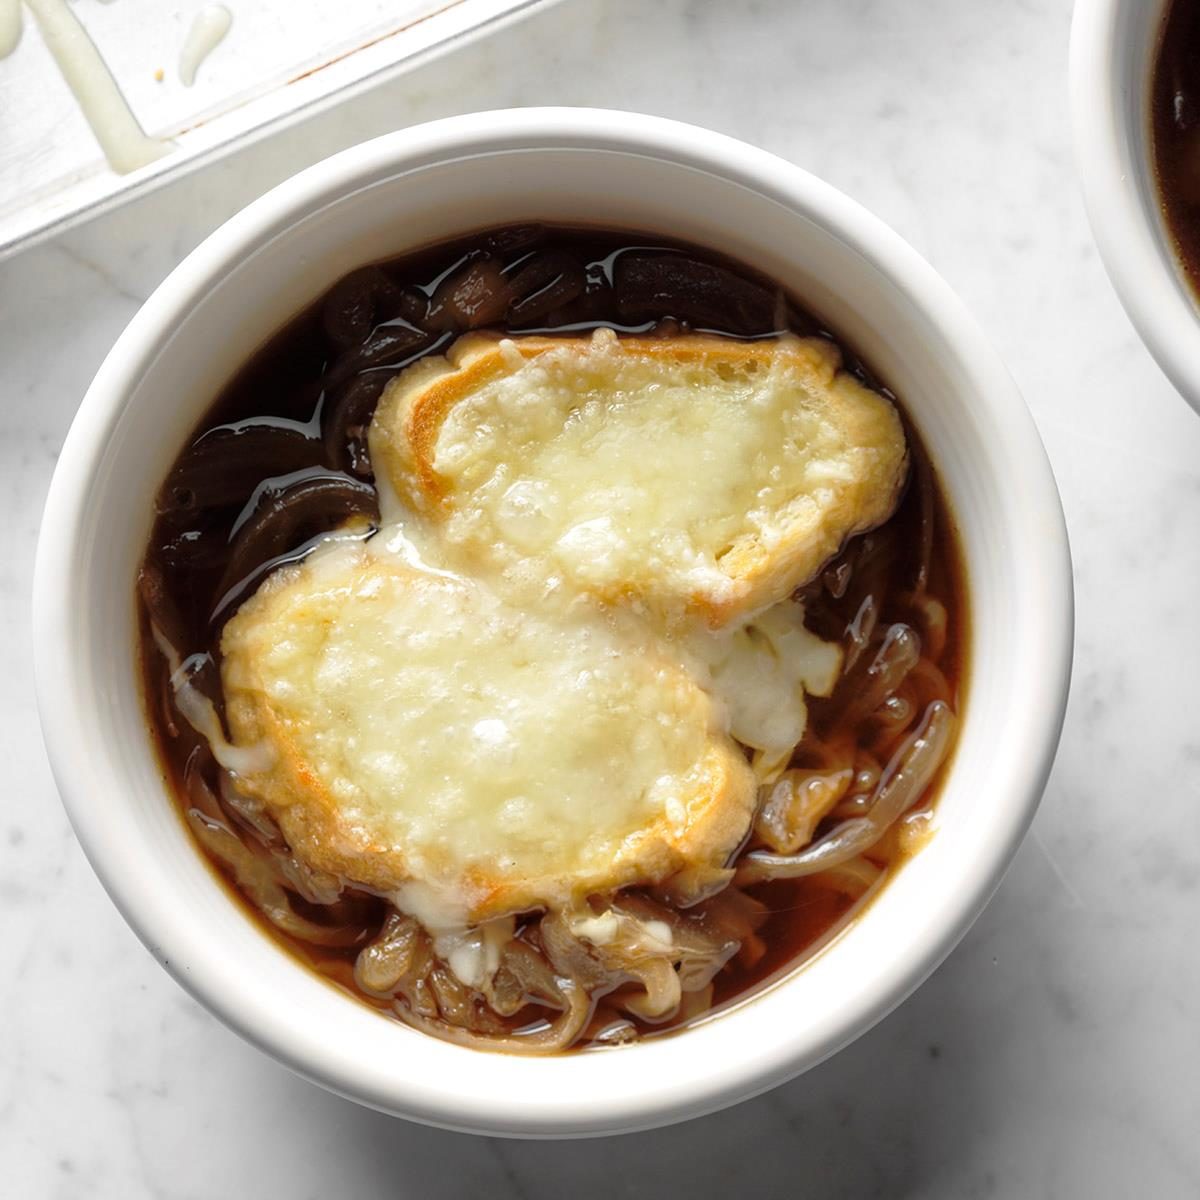 favourite slow cooker recipes - Slow-cooked French onion soup